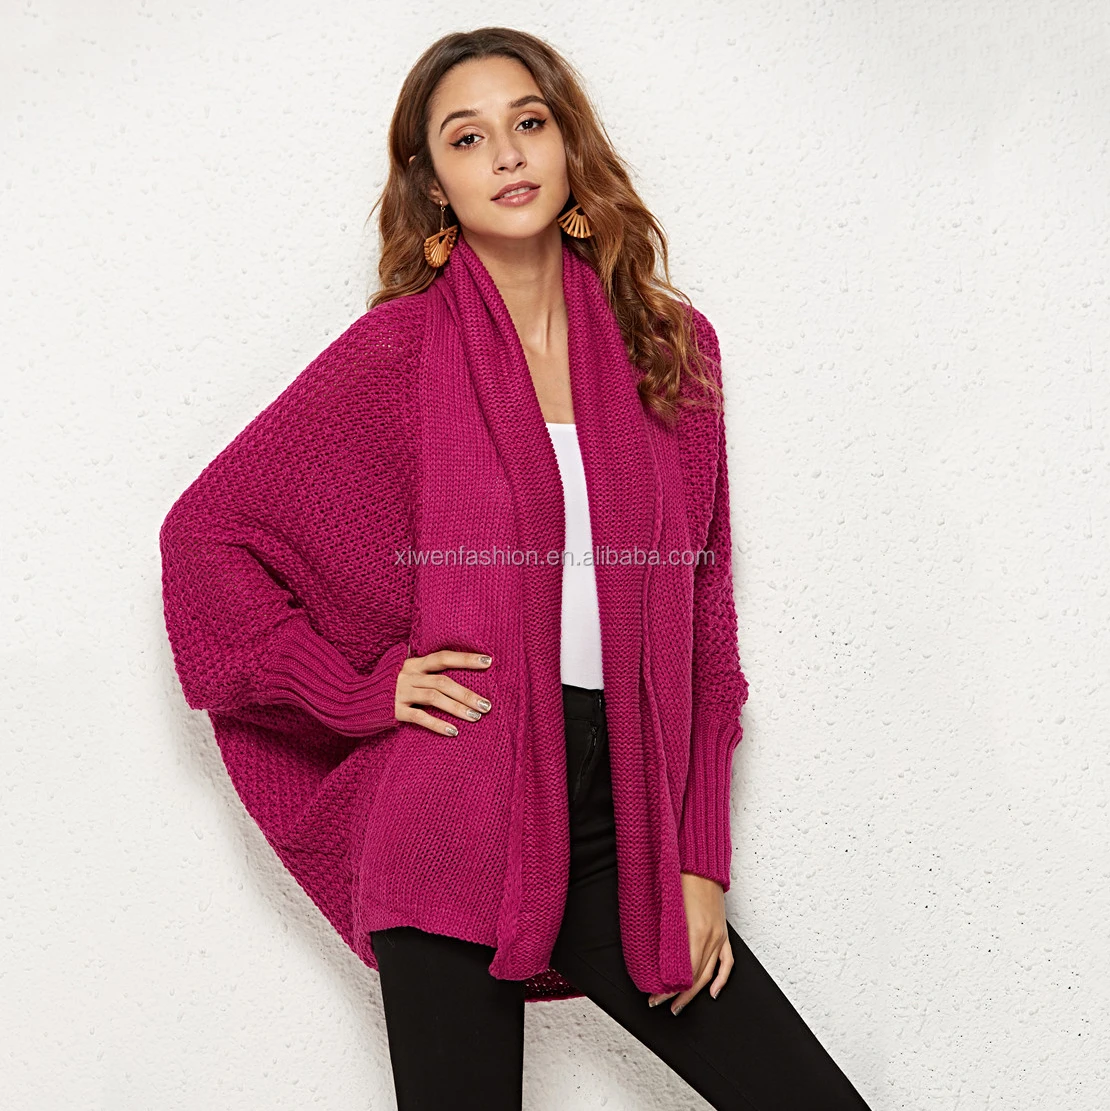 

Women Autumn and Winter Chunky butterfly sleeves Open Front Knit Jackets Dolman Sleeve Cardigan Sweaters